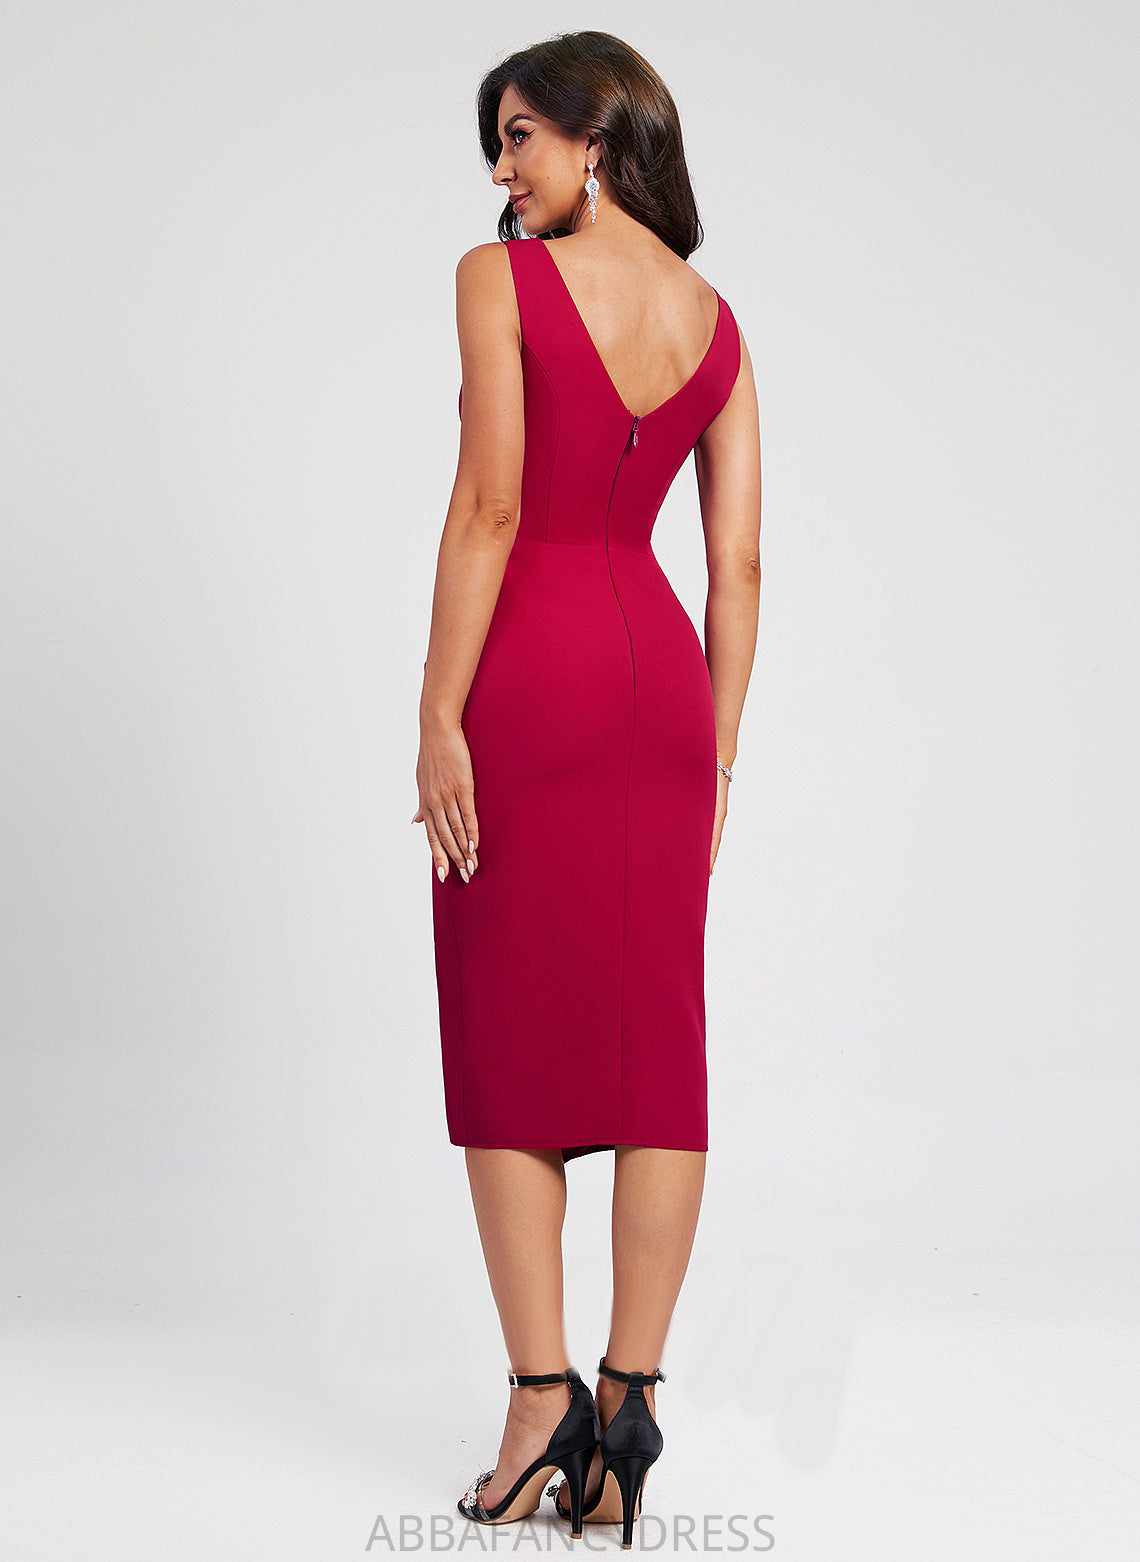 Ruffle Dress V-neck Crepe Aimee Knee-Length Split Bodycon Cocktail With Front Stretch Club Dresses